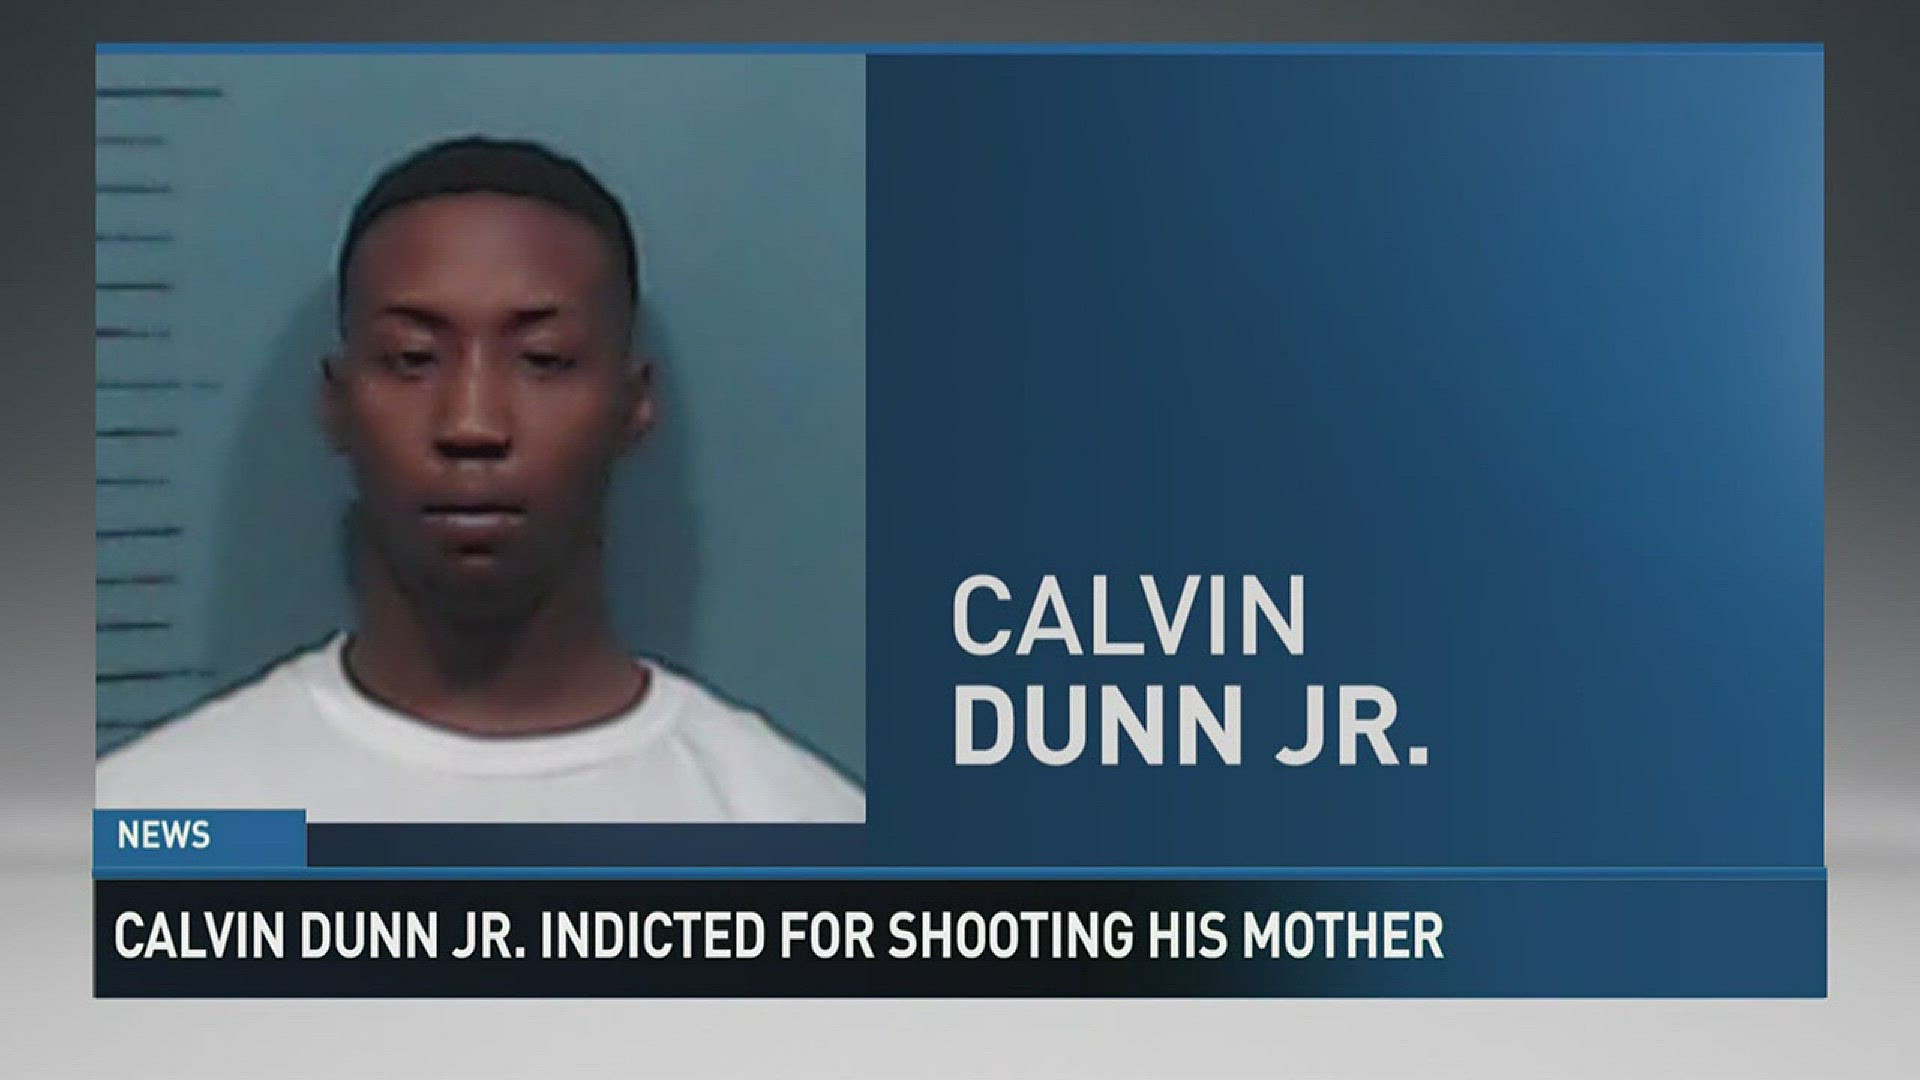 The man accused of shooting his mother in the head has been indicted.